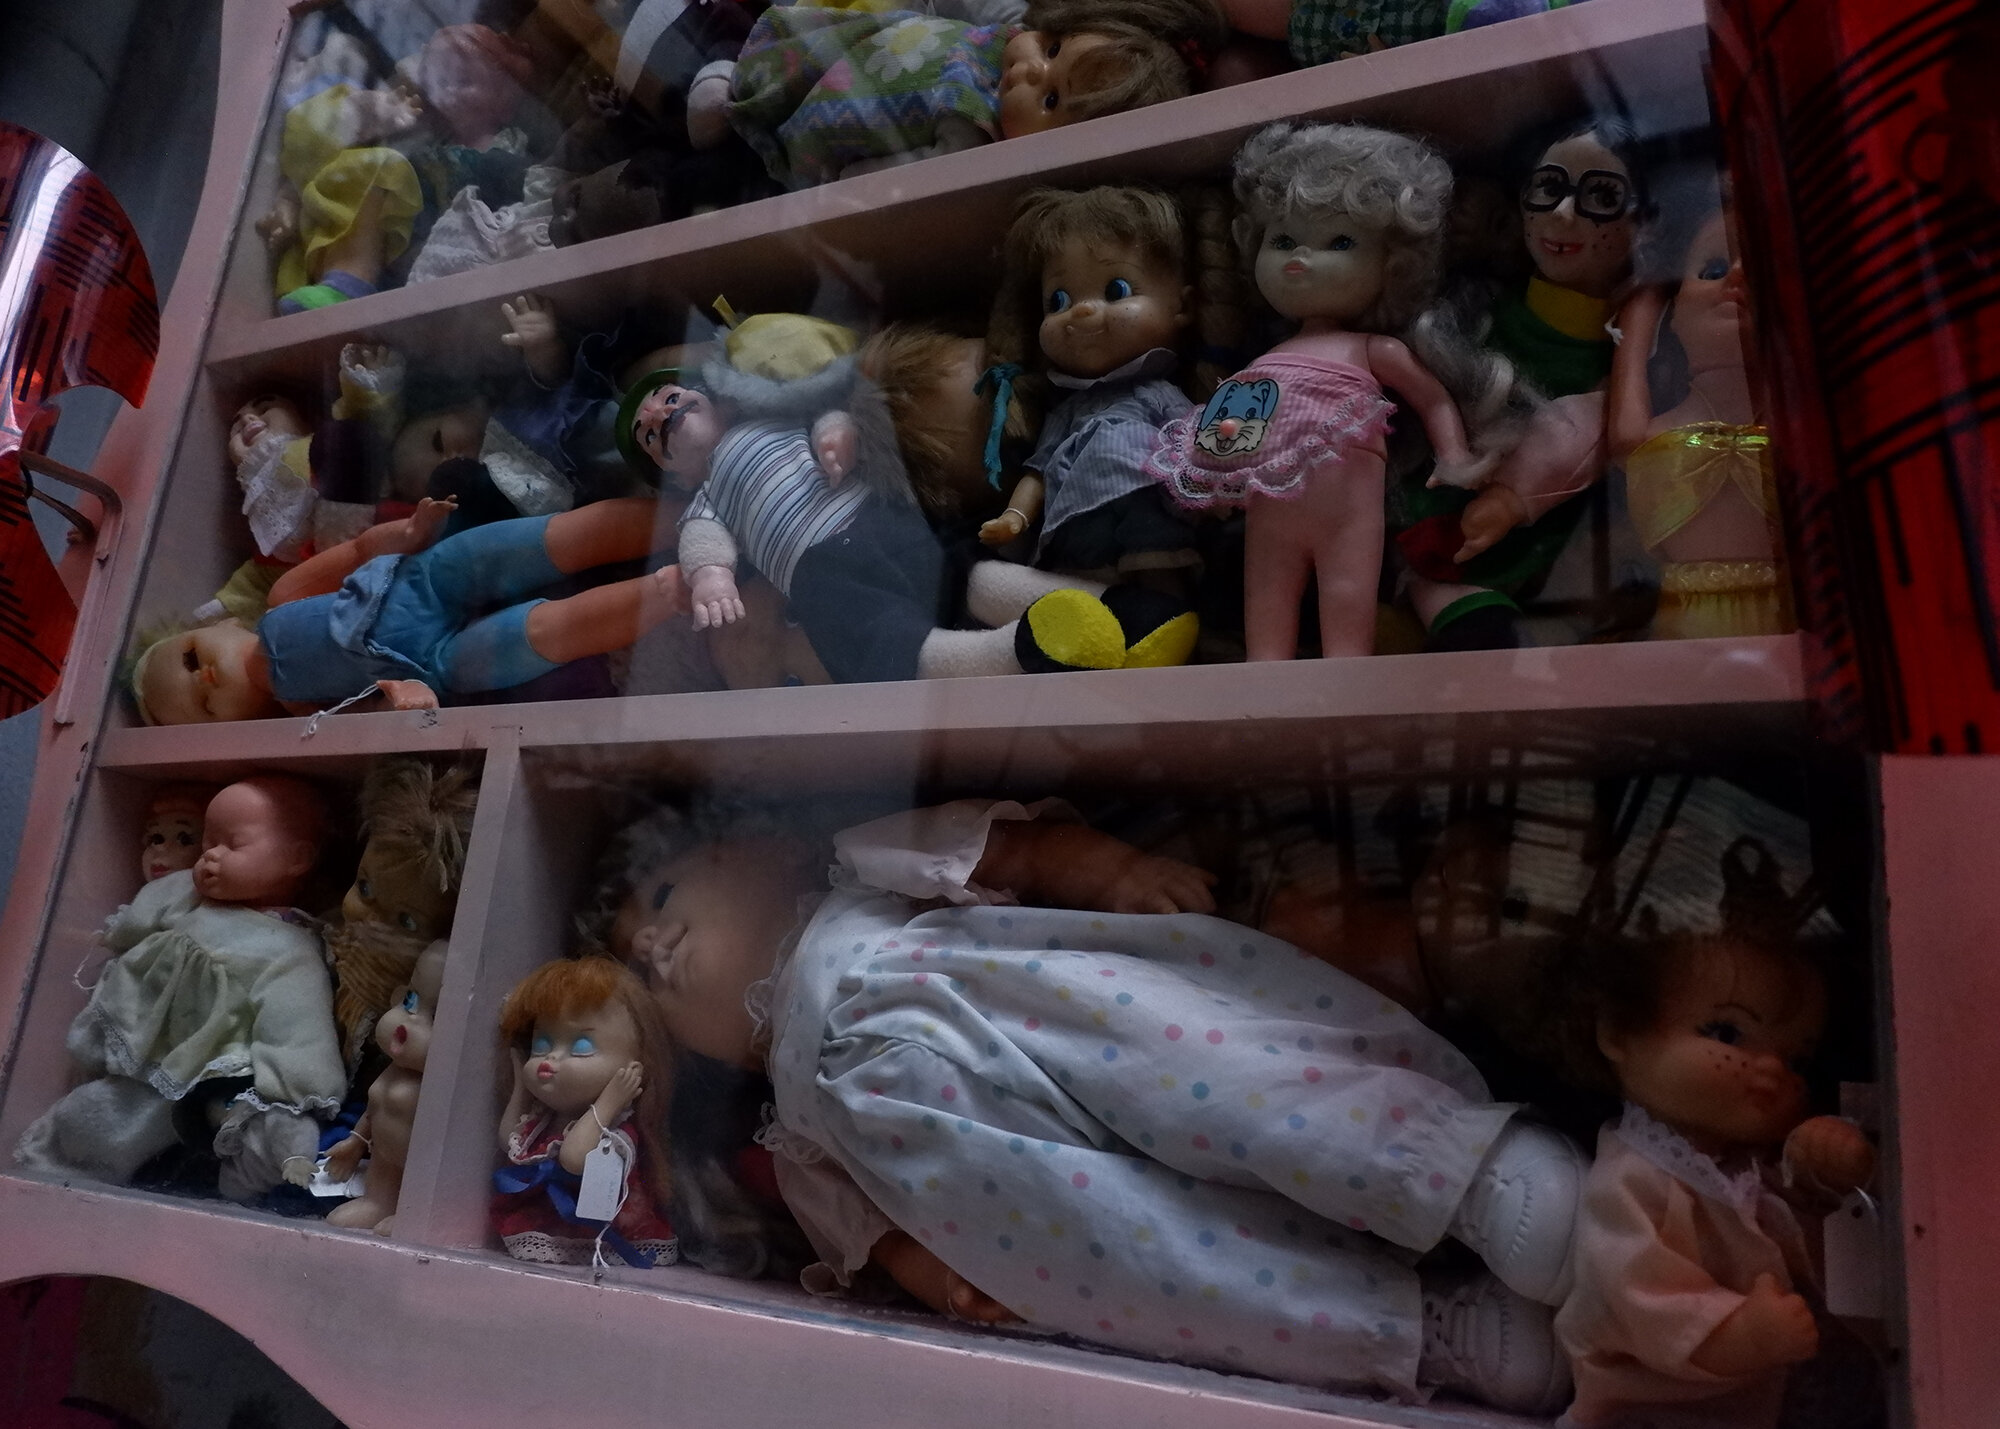 the toy museum is a place where dreams come true